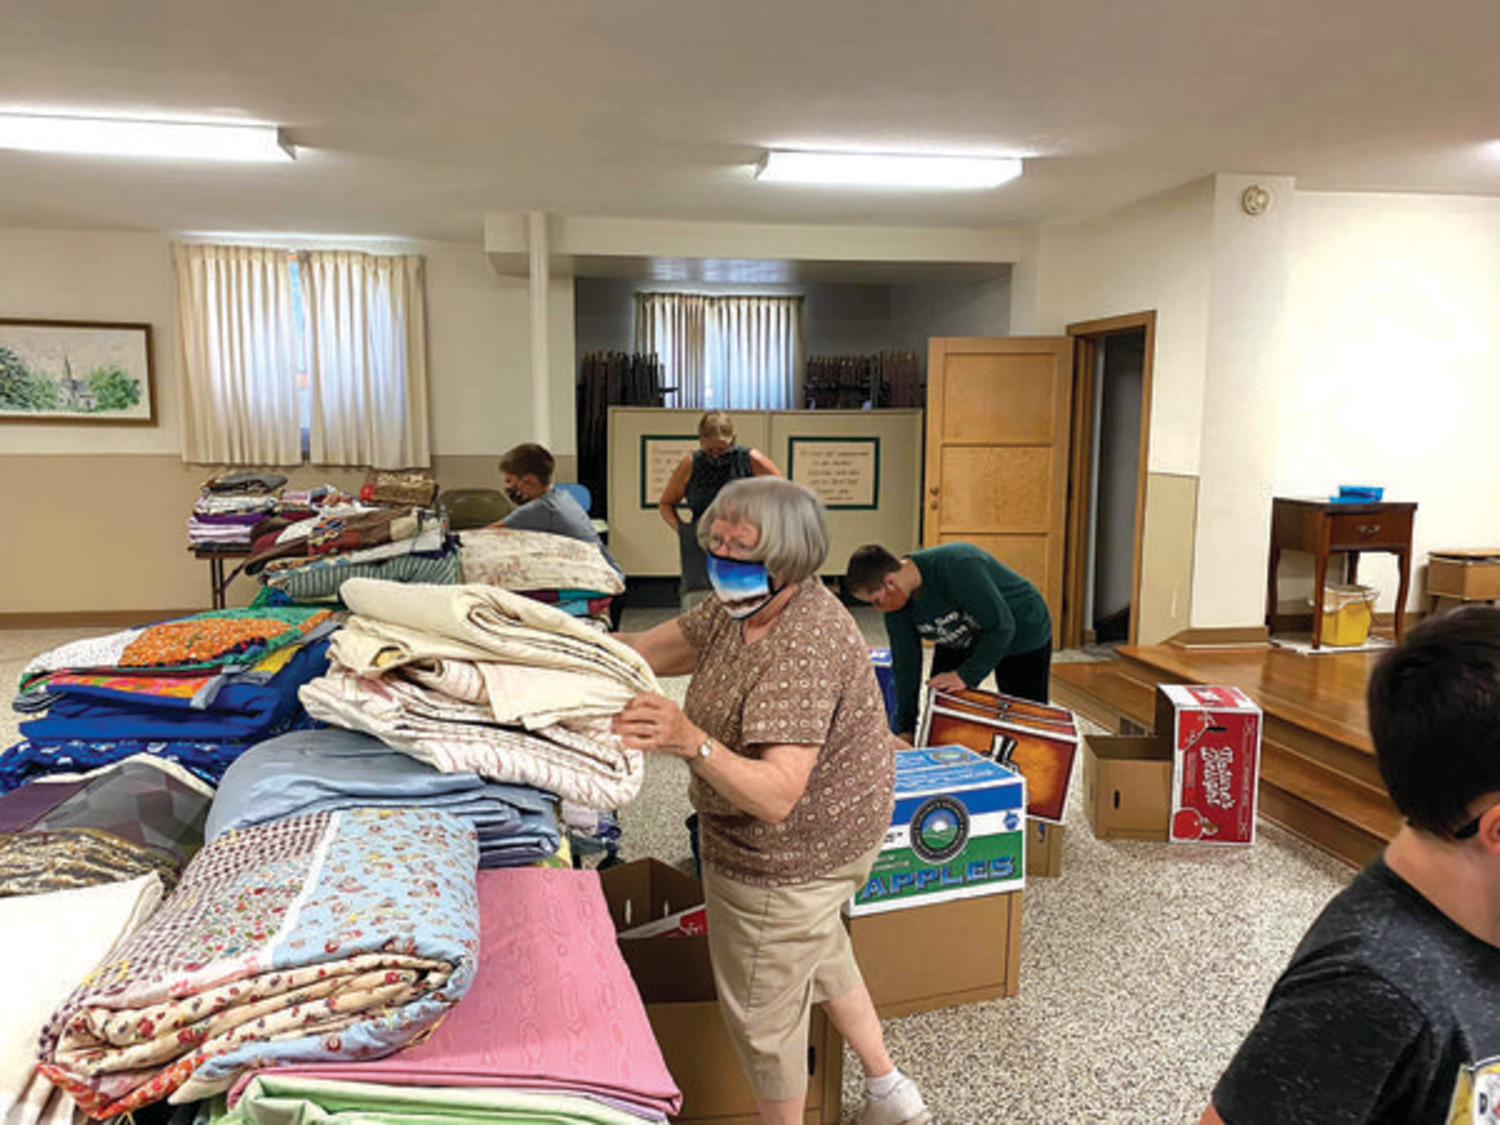 LUTHERAN WORLD RELIEF -- The quilting groups made 311 quilts in the past year. Elaine Nauss (in front), Drake Mehan, Kathy Mehan and Miriam Morlock are pictured getting the quilts and 81 kits ready to send to Lutheran World Relief.                     --submitted photos